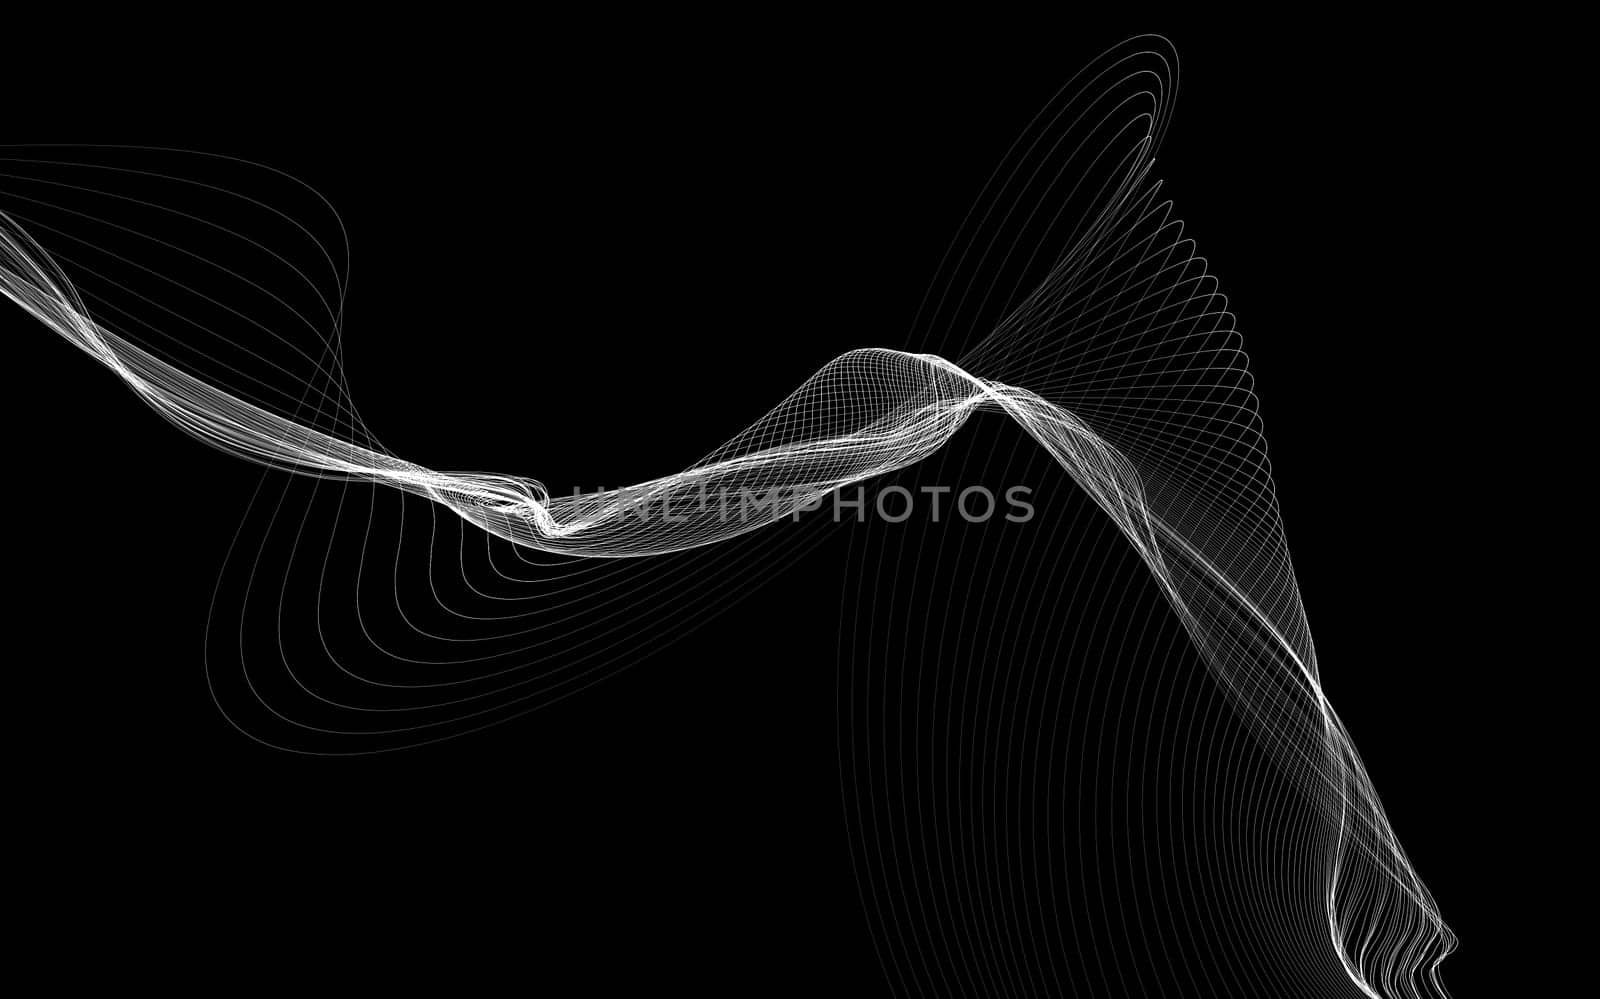 Dark abstract background with a glowing abstract waves by teerawit